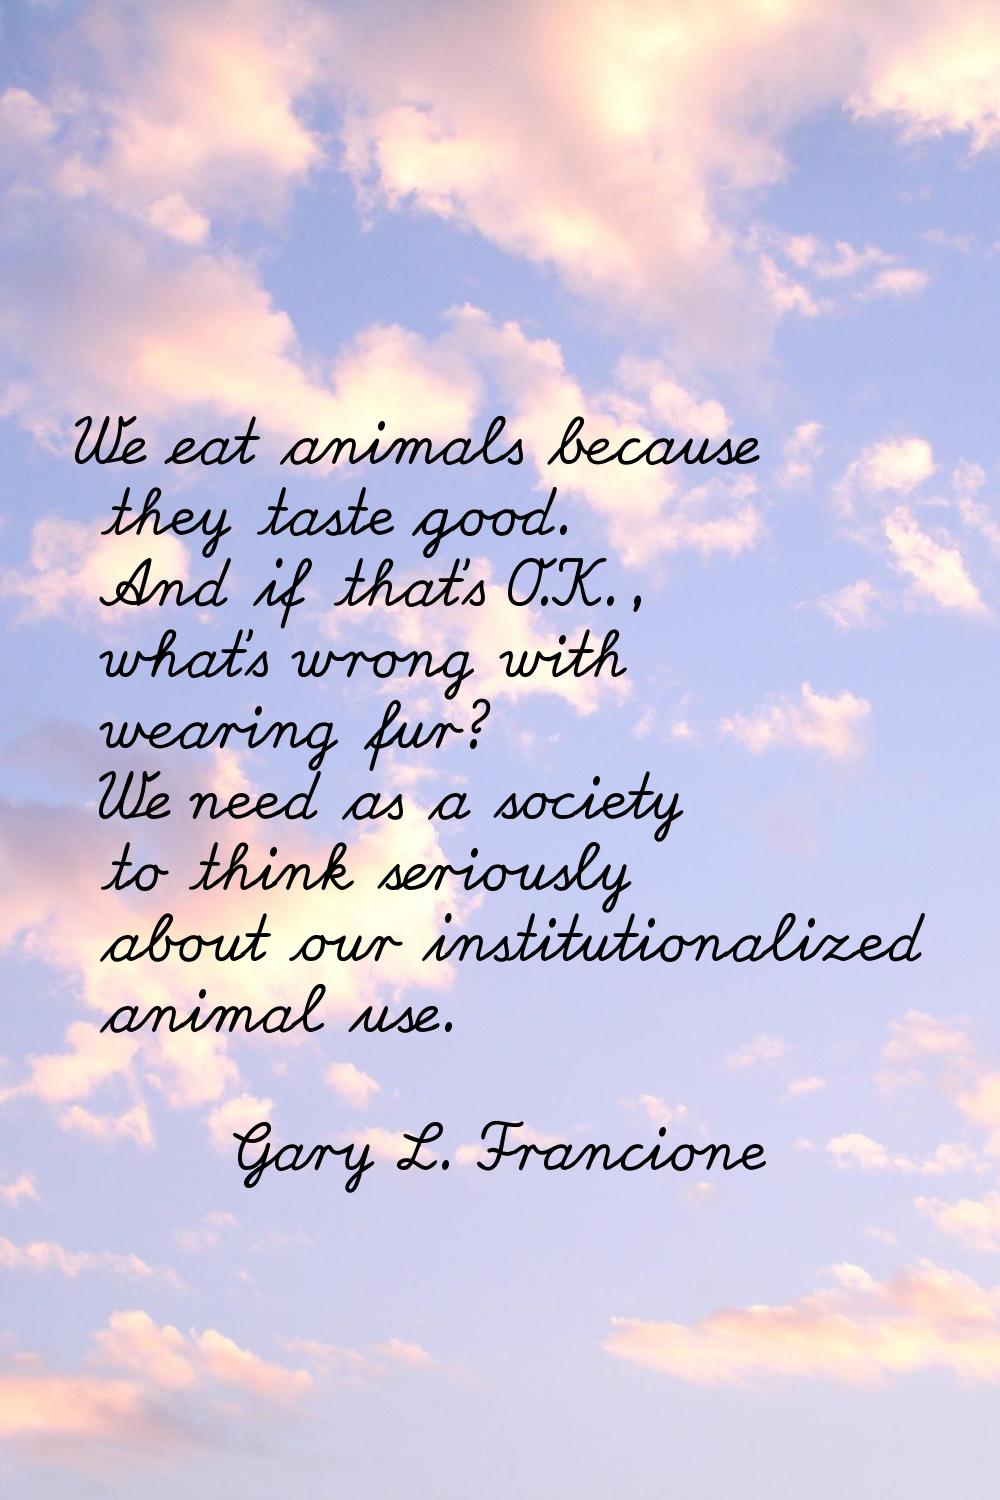 We eat animals because they taste good. And if that's O.K., what's wrong with wearing fur? We need 